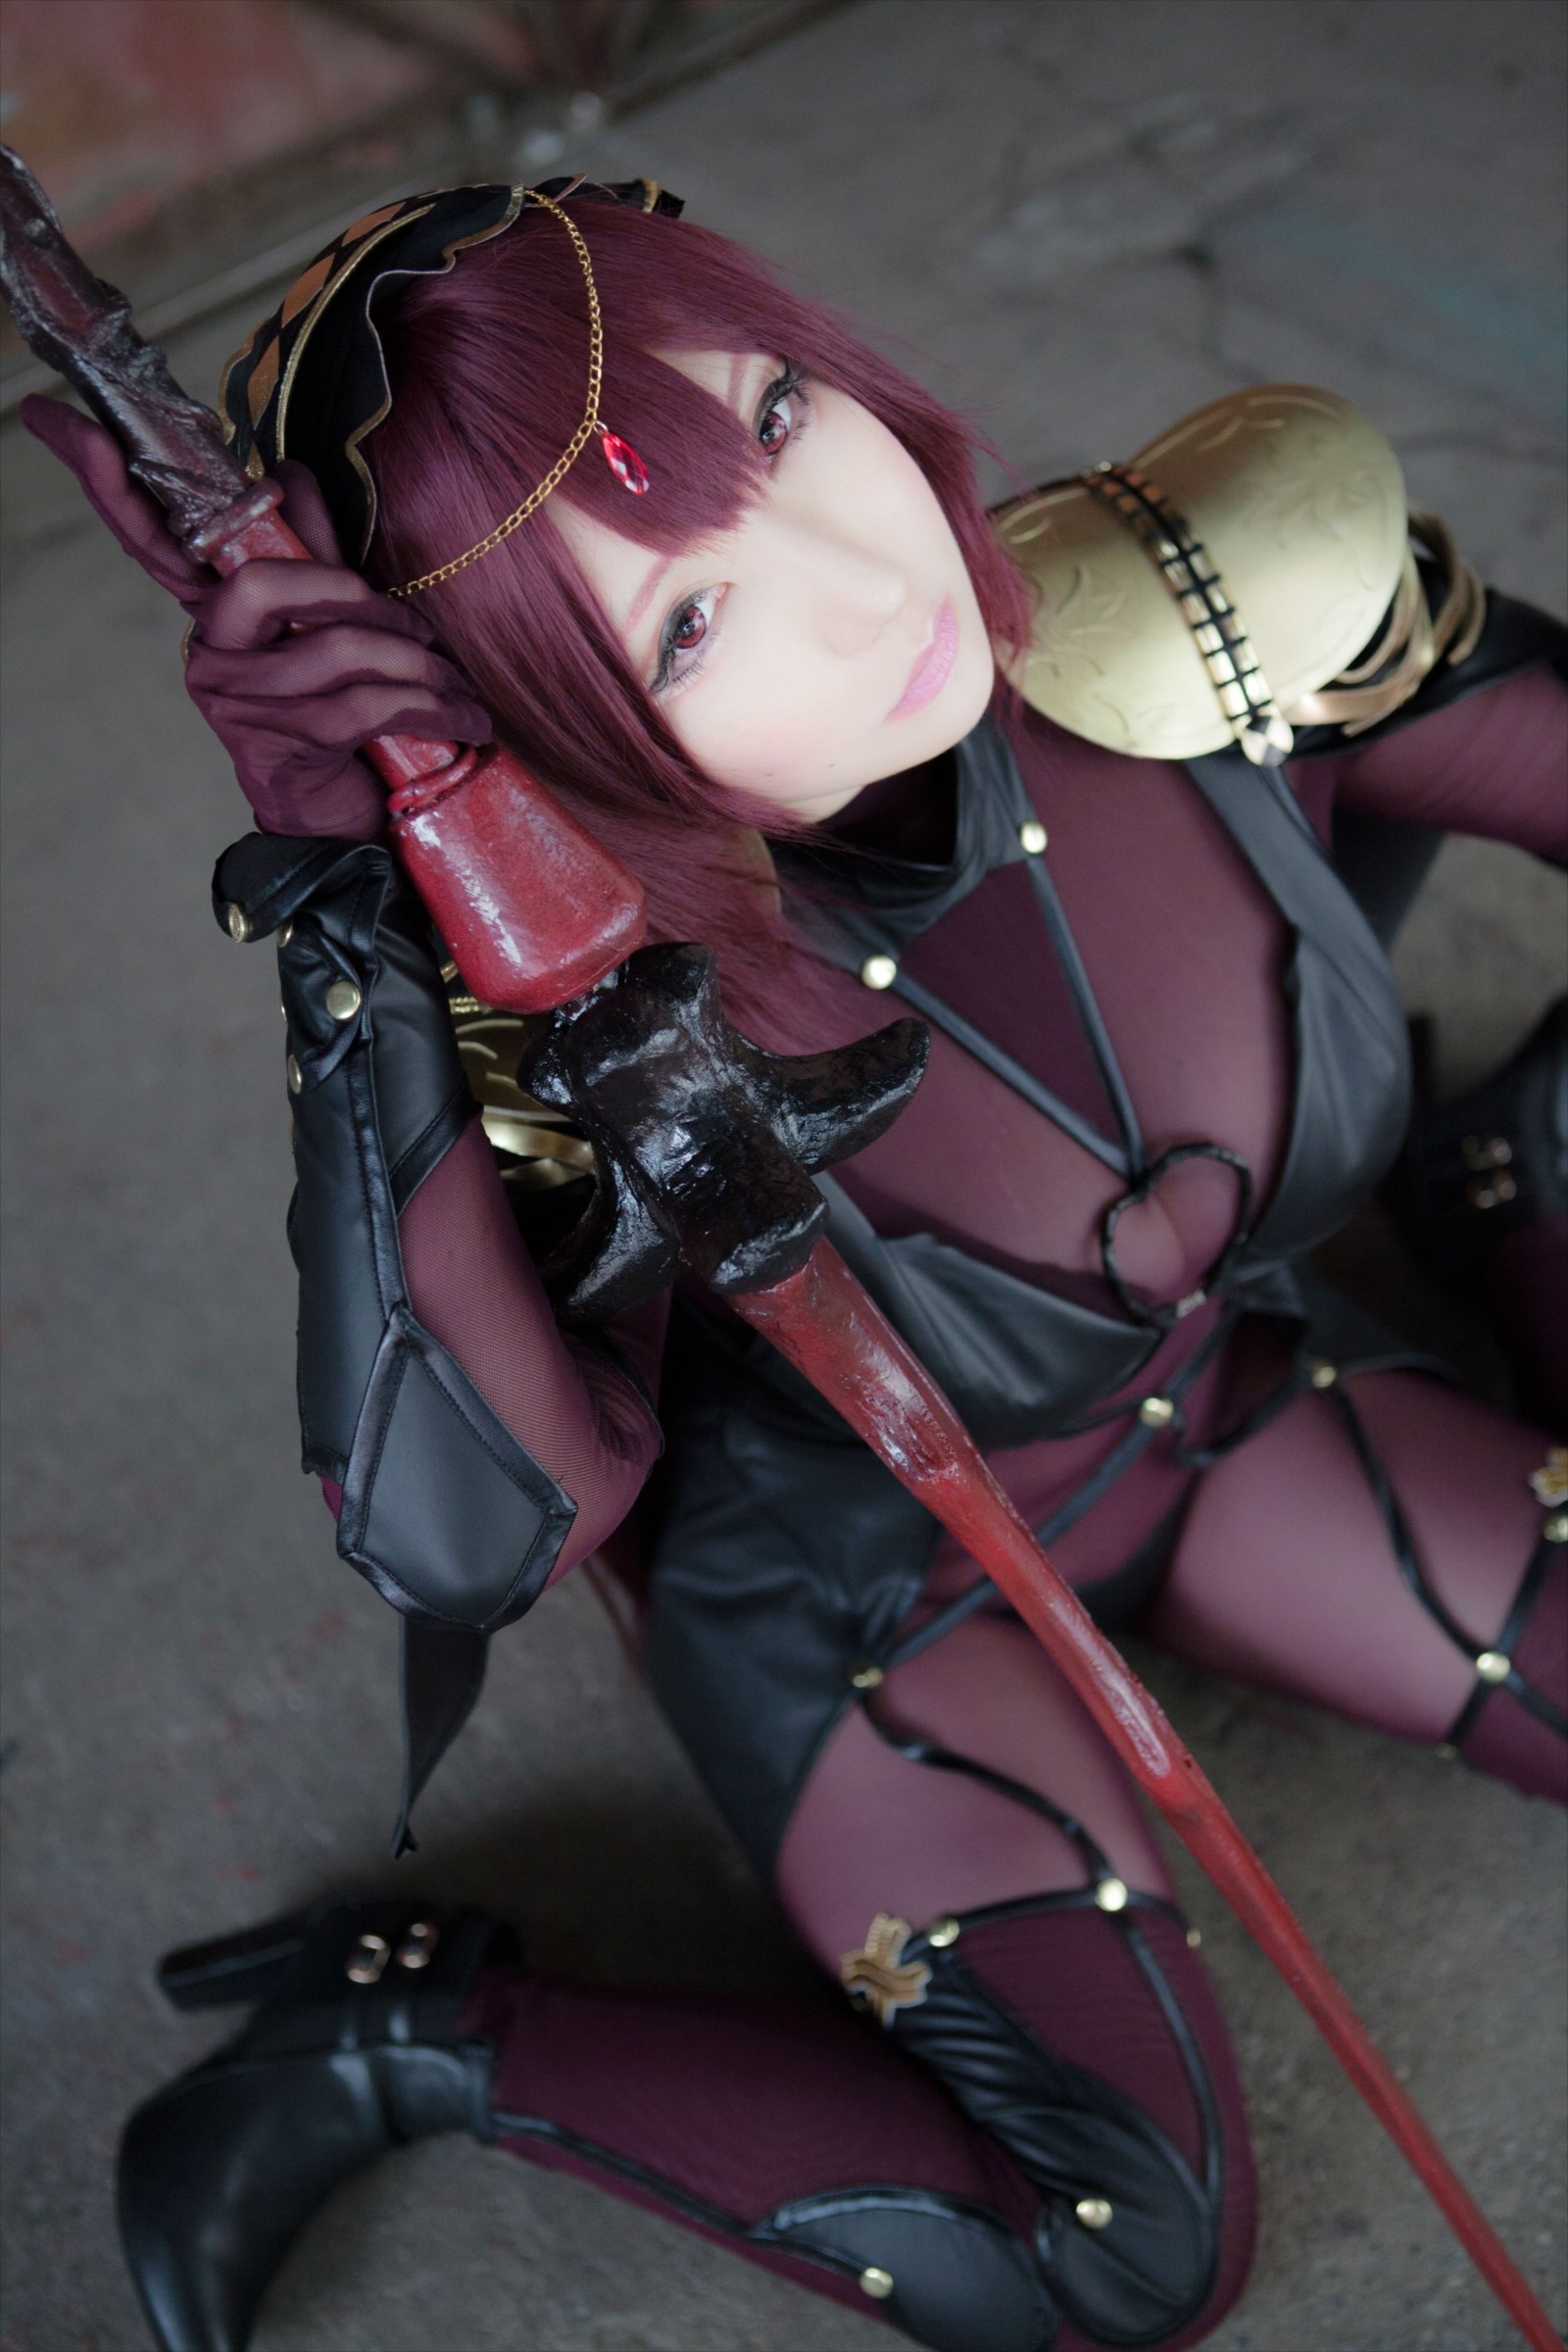 cos (Cosplay)(C92) Shooting Star (サク) Shadow Queen 598MB1(22)